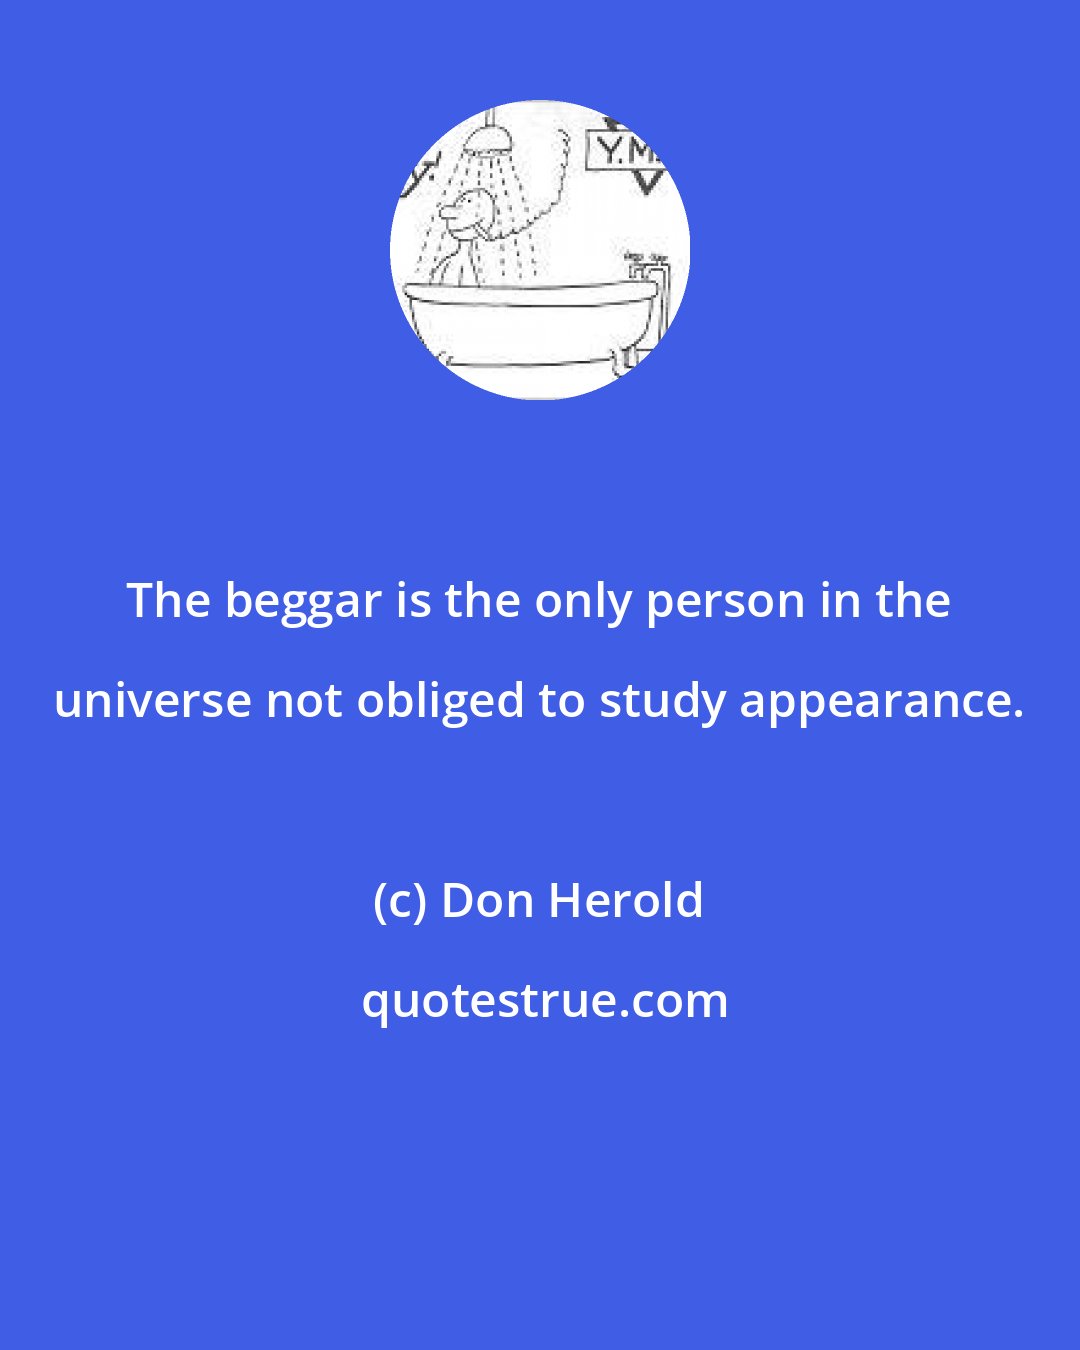 Don Herold: The beggar is the only person in the universe not obliged to study appearance.